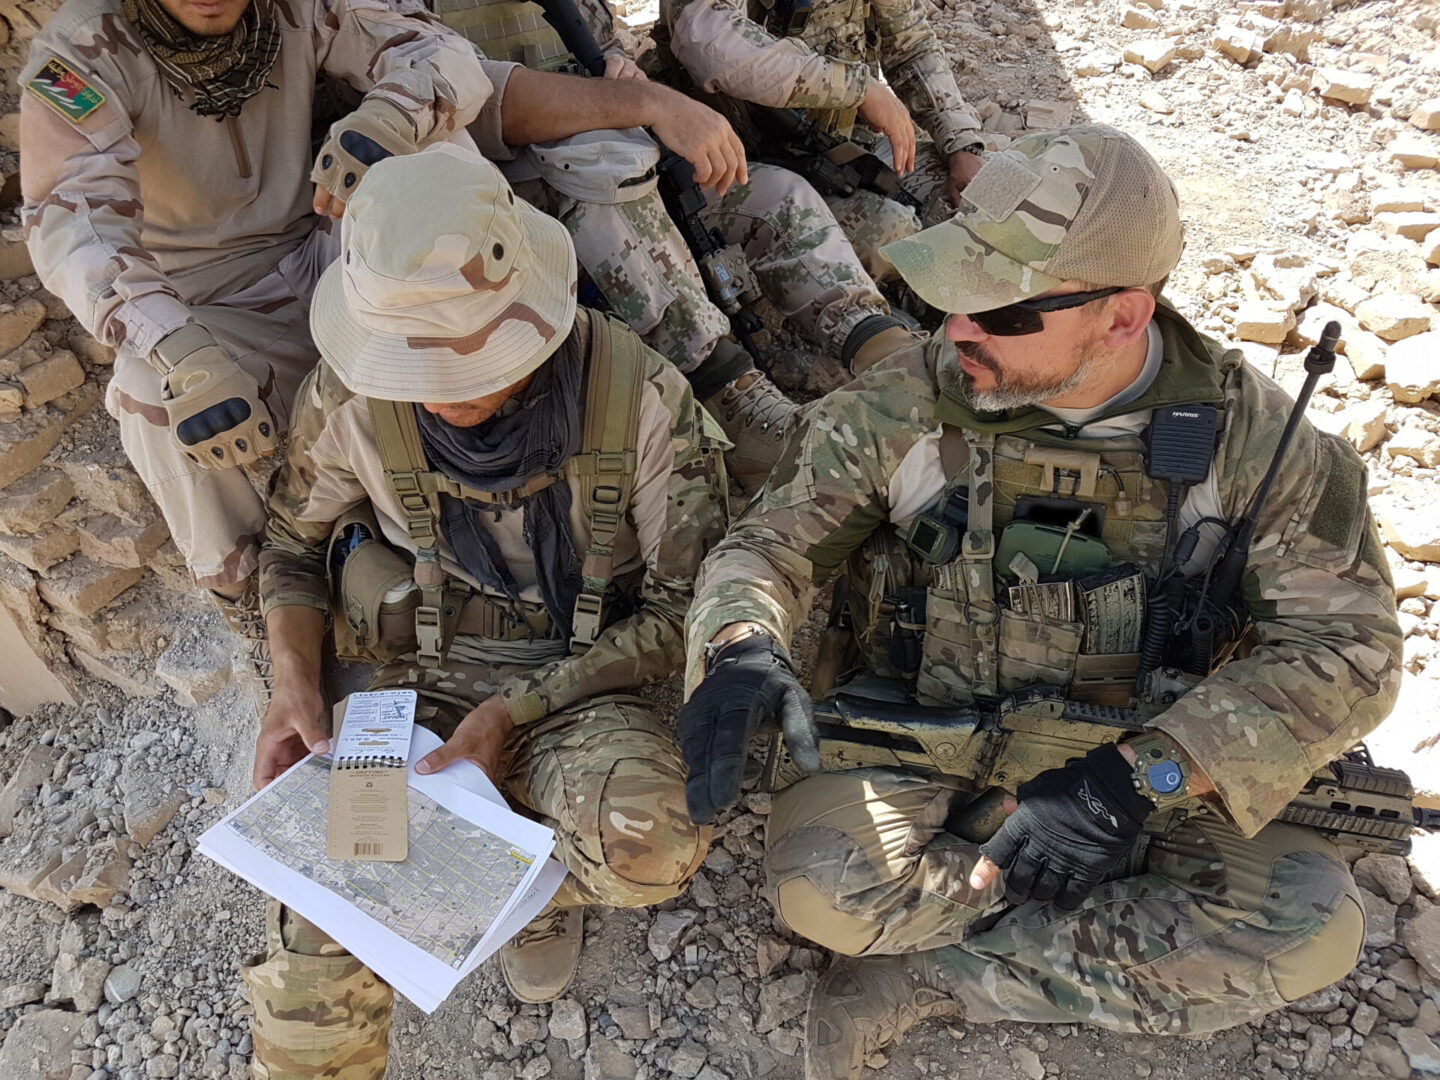 KANDAHAR, AFGHANISTAN (July 10, 2018) -- A coalition Joint Terminal Attack Controller (JTAC) advisor trains two Afghan Territorial Force 444 members from General Command of Police Special Unit (GCPSU) to identify targets on the battlefield during an air-to-ground integration exercise at Tarnak range, Kandahar province, Afghanistan, Jul. 9-10, 2018.  During the two-day exercise, more than 50 Afghan Tactical Air Controllers from both ATF 444 and the Special Mission Wing, advised by U.S. and Coalition partners, directed airstrikes onto simulated static targets. (NATO photo/RELEASED)